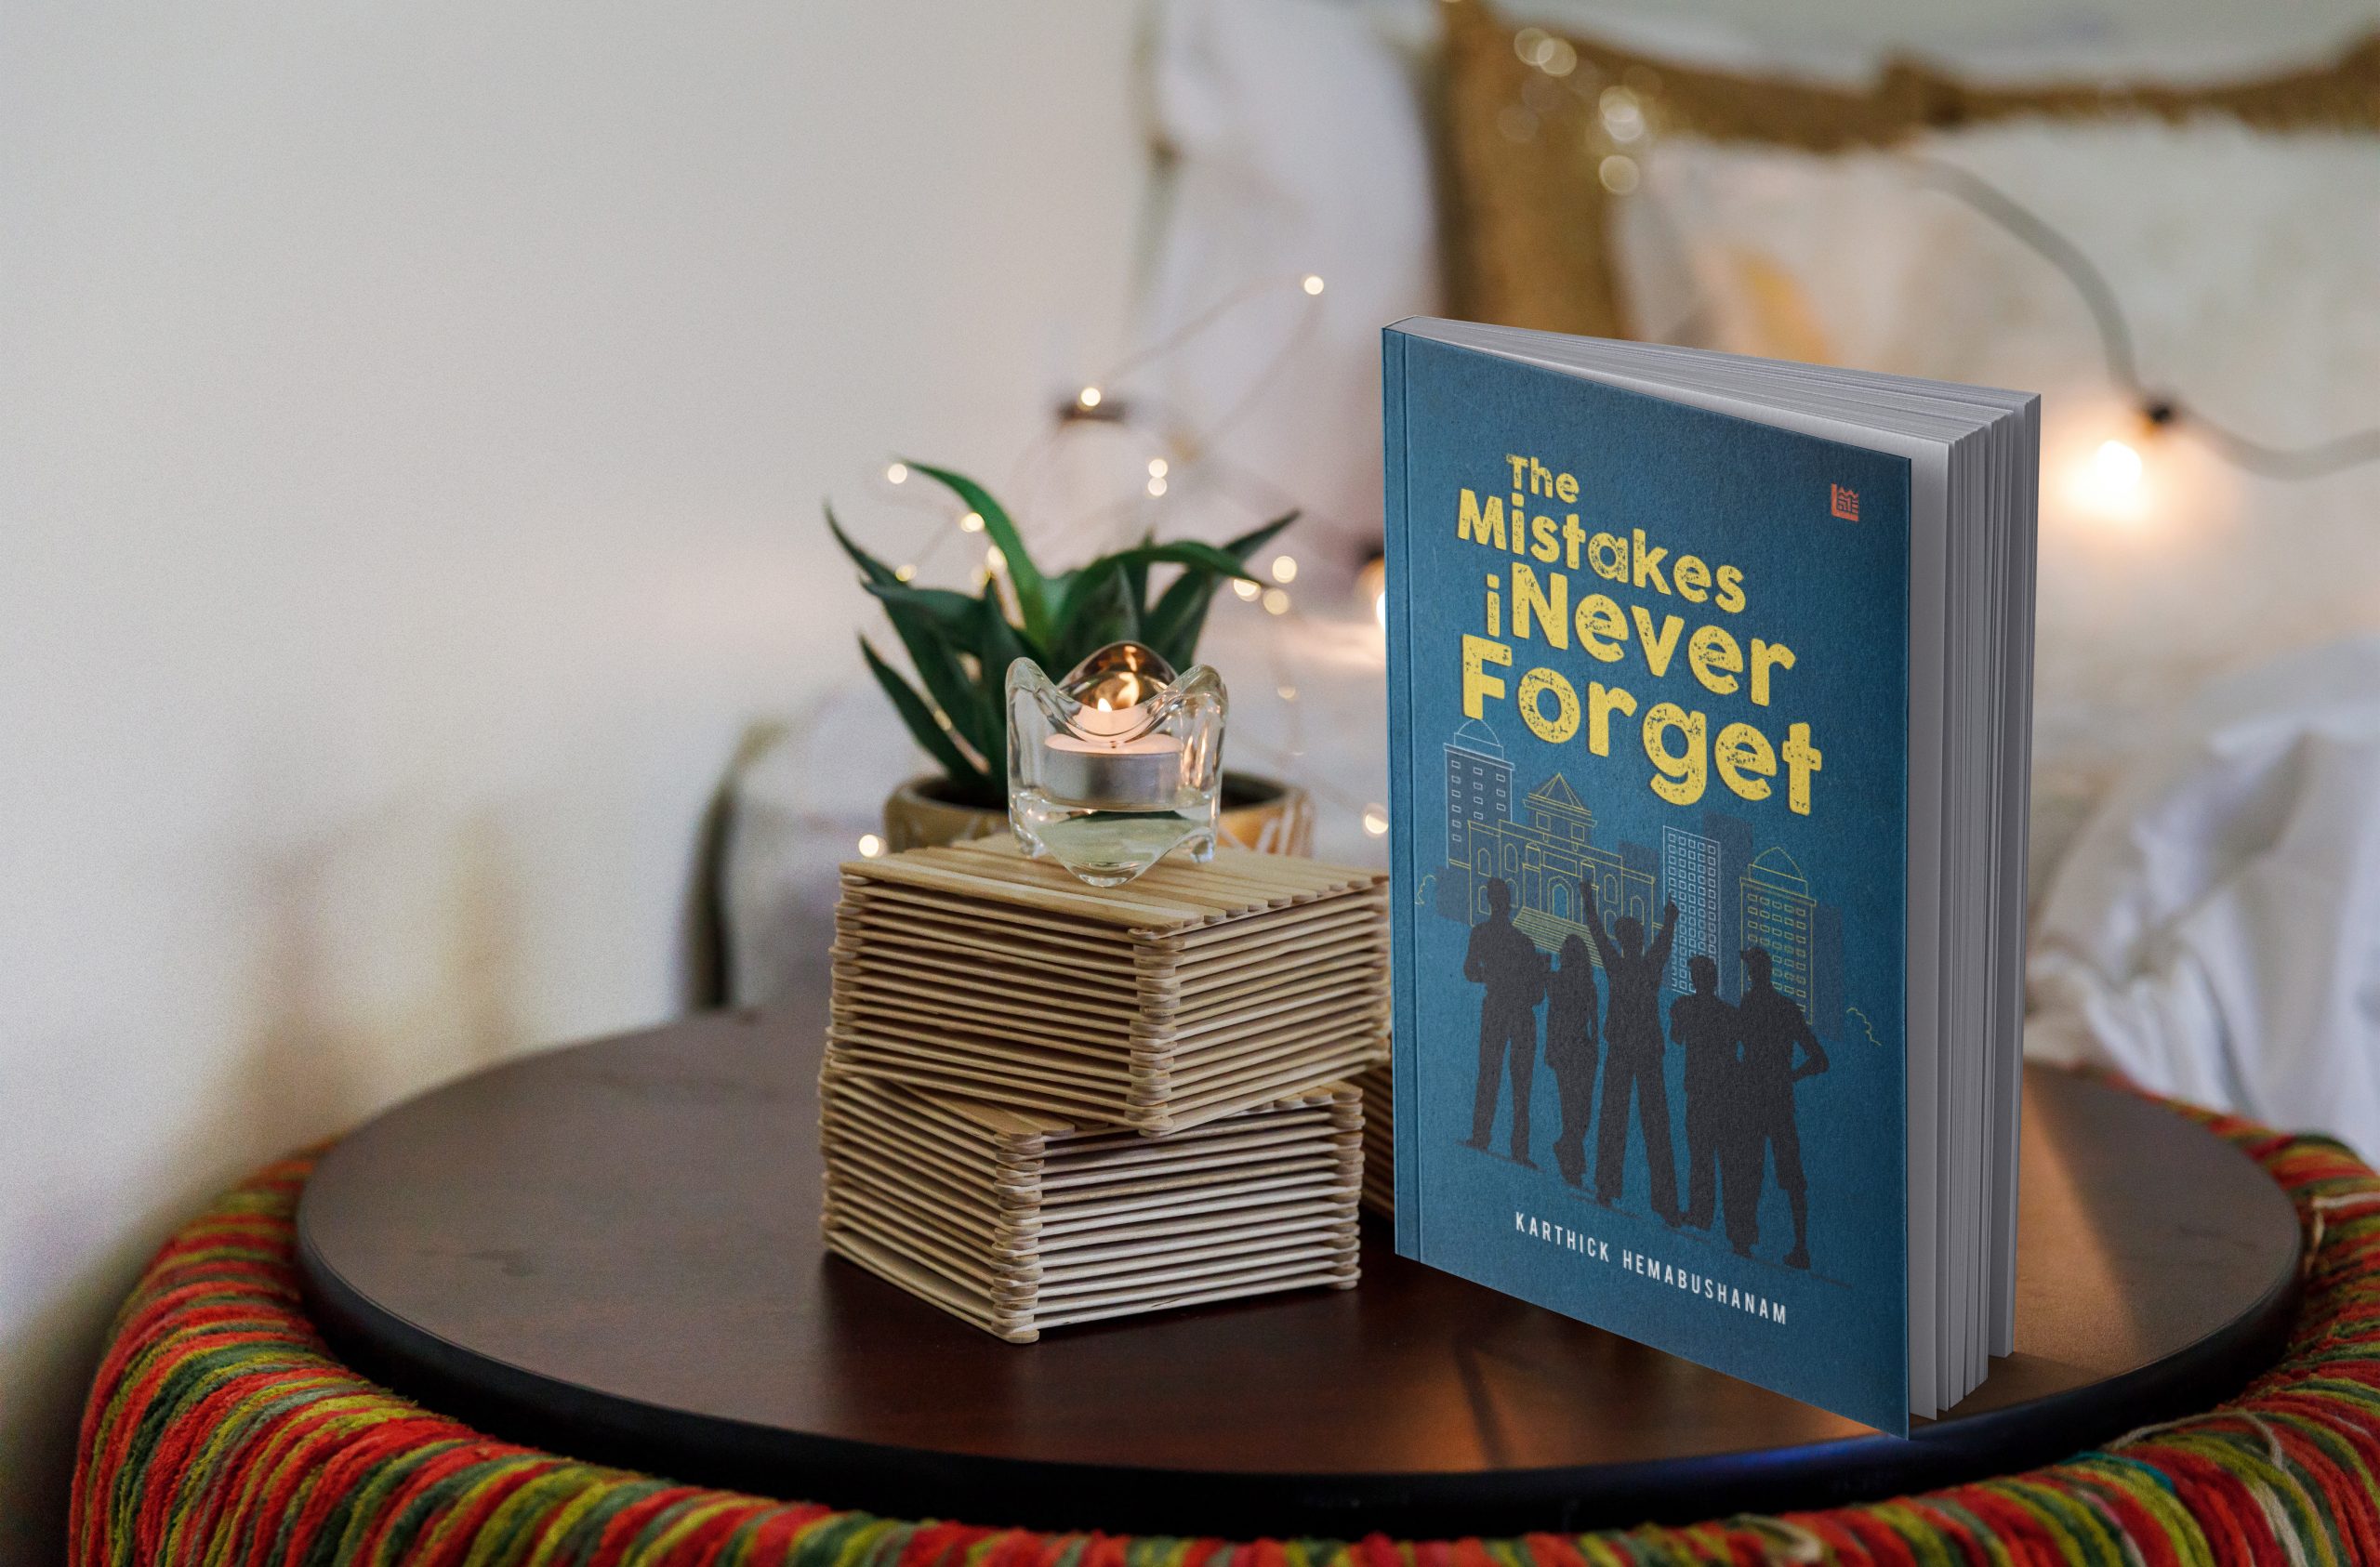 Book Review - The Mistakes I Never Forget by Karthick Hemabushanam